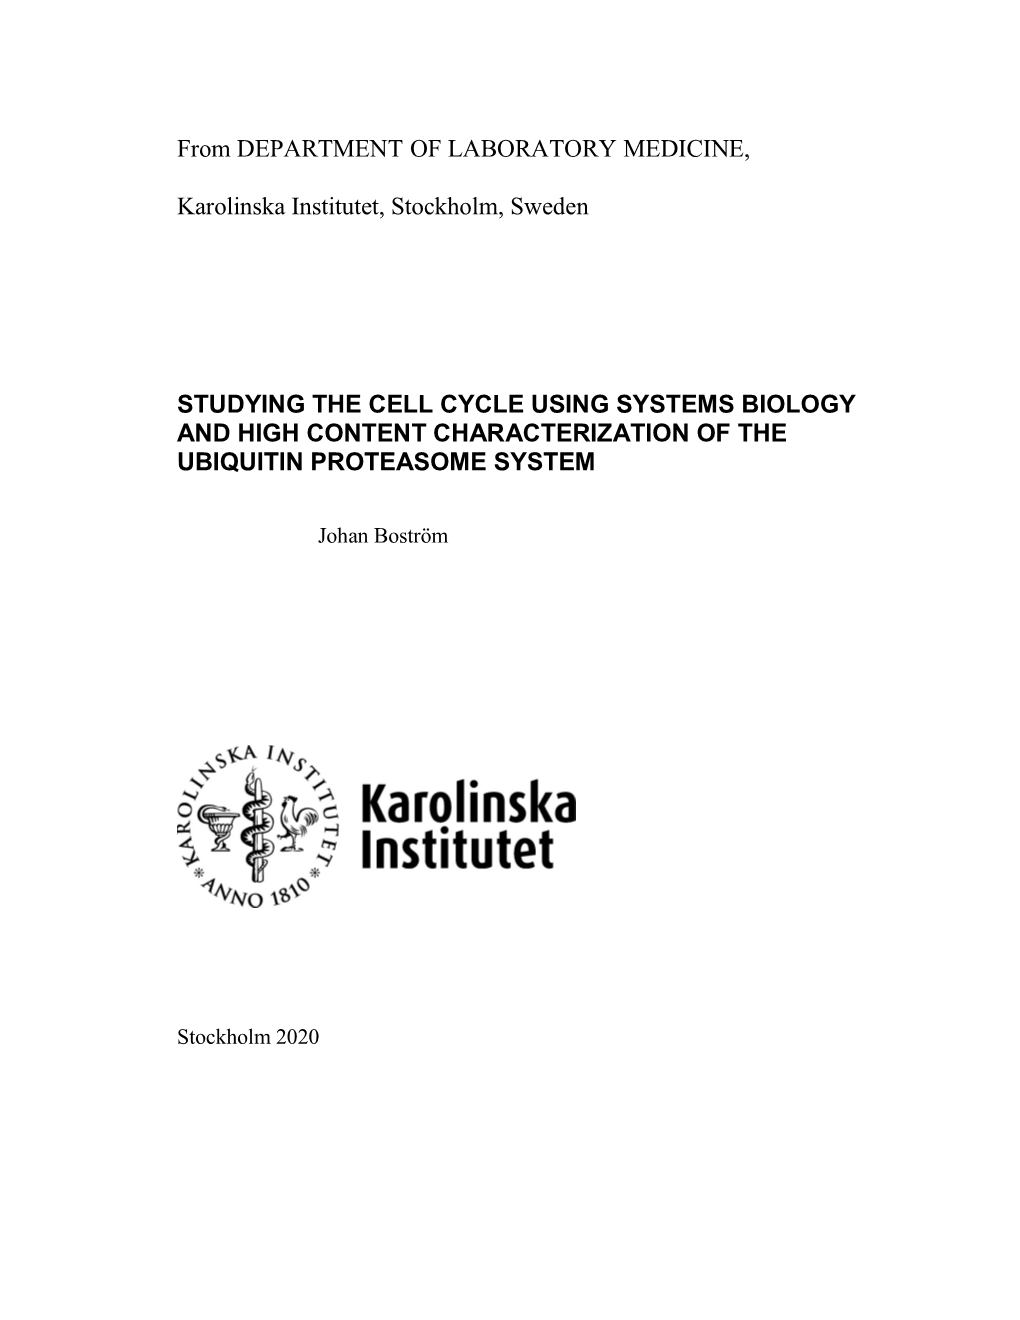 From DEPARTMENT of LABORATORY MEDICINE, Karolinska Institutet, Stockholm, Sweden STUDYING the CELL CYCLE USING SYSTEMS BIOLOGY A